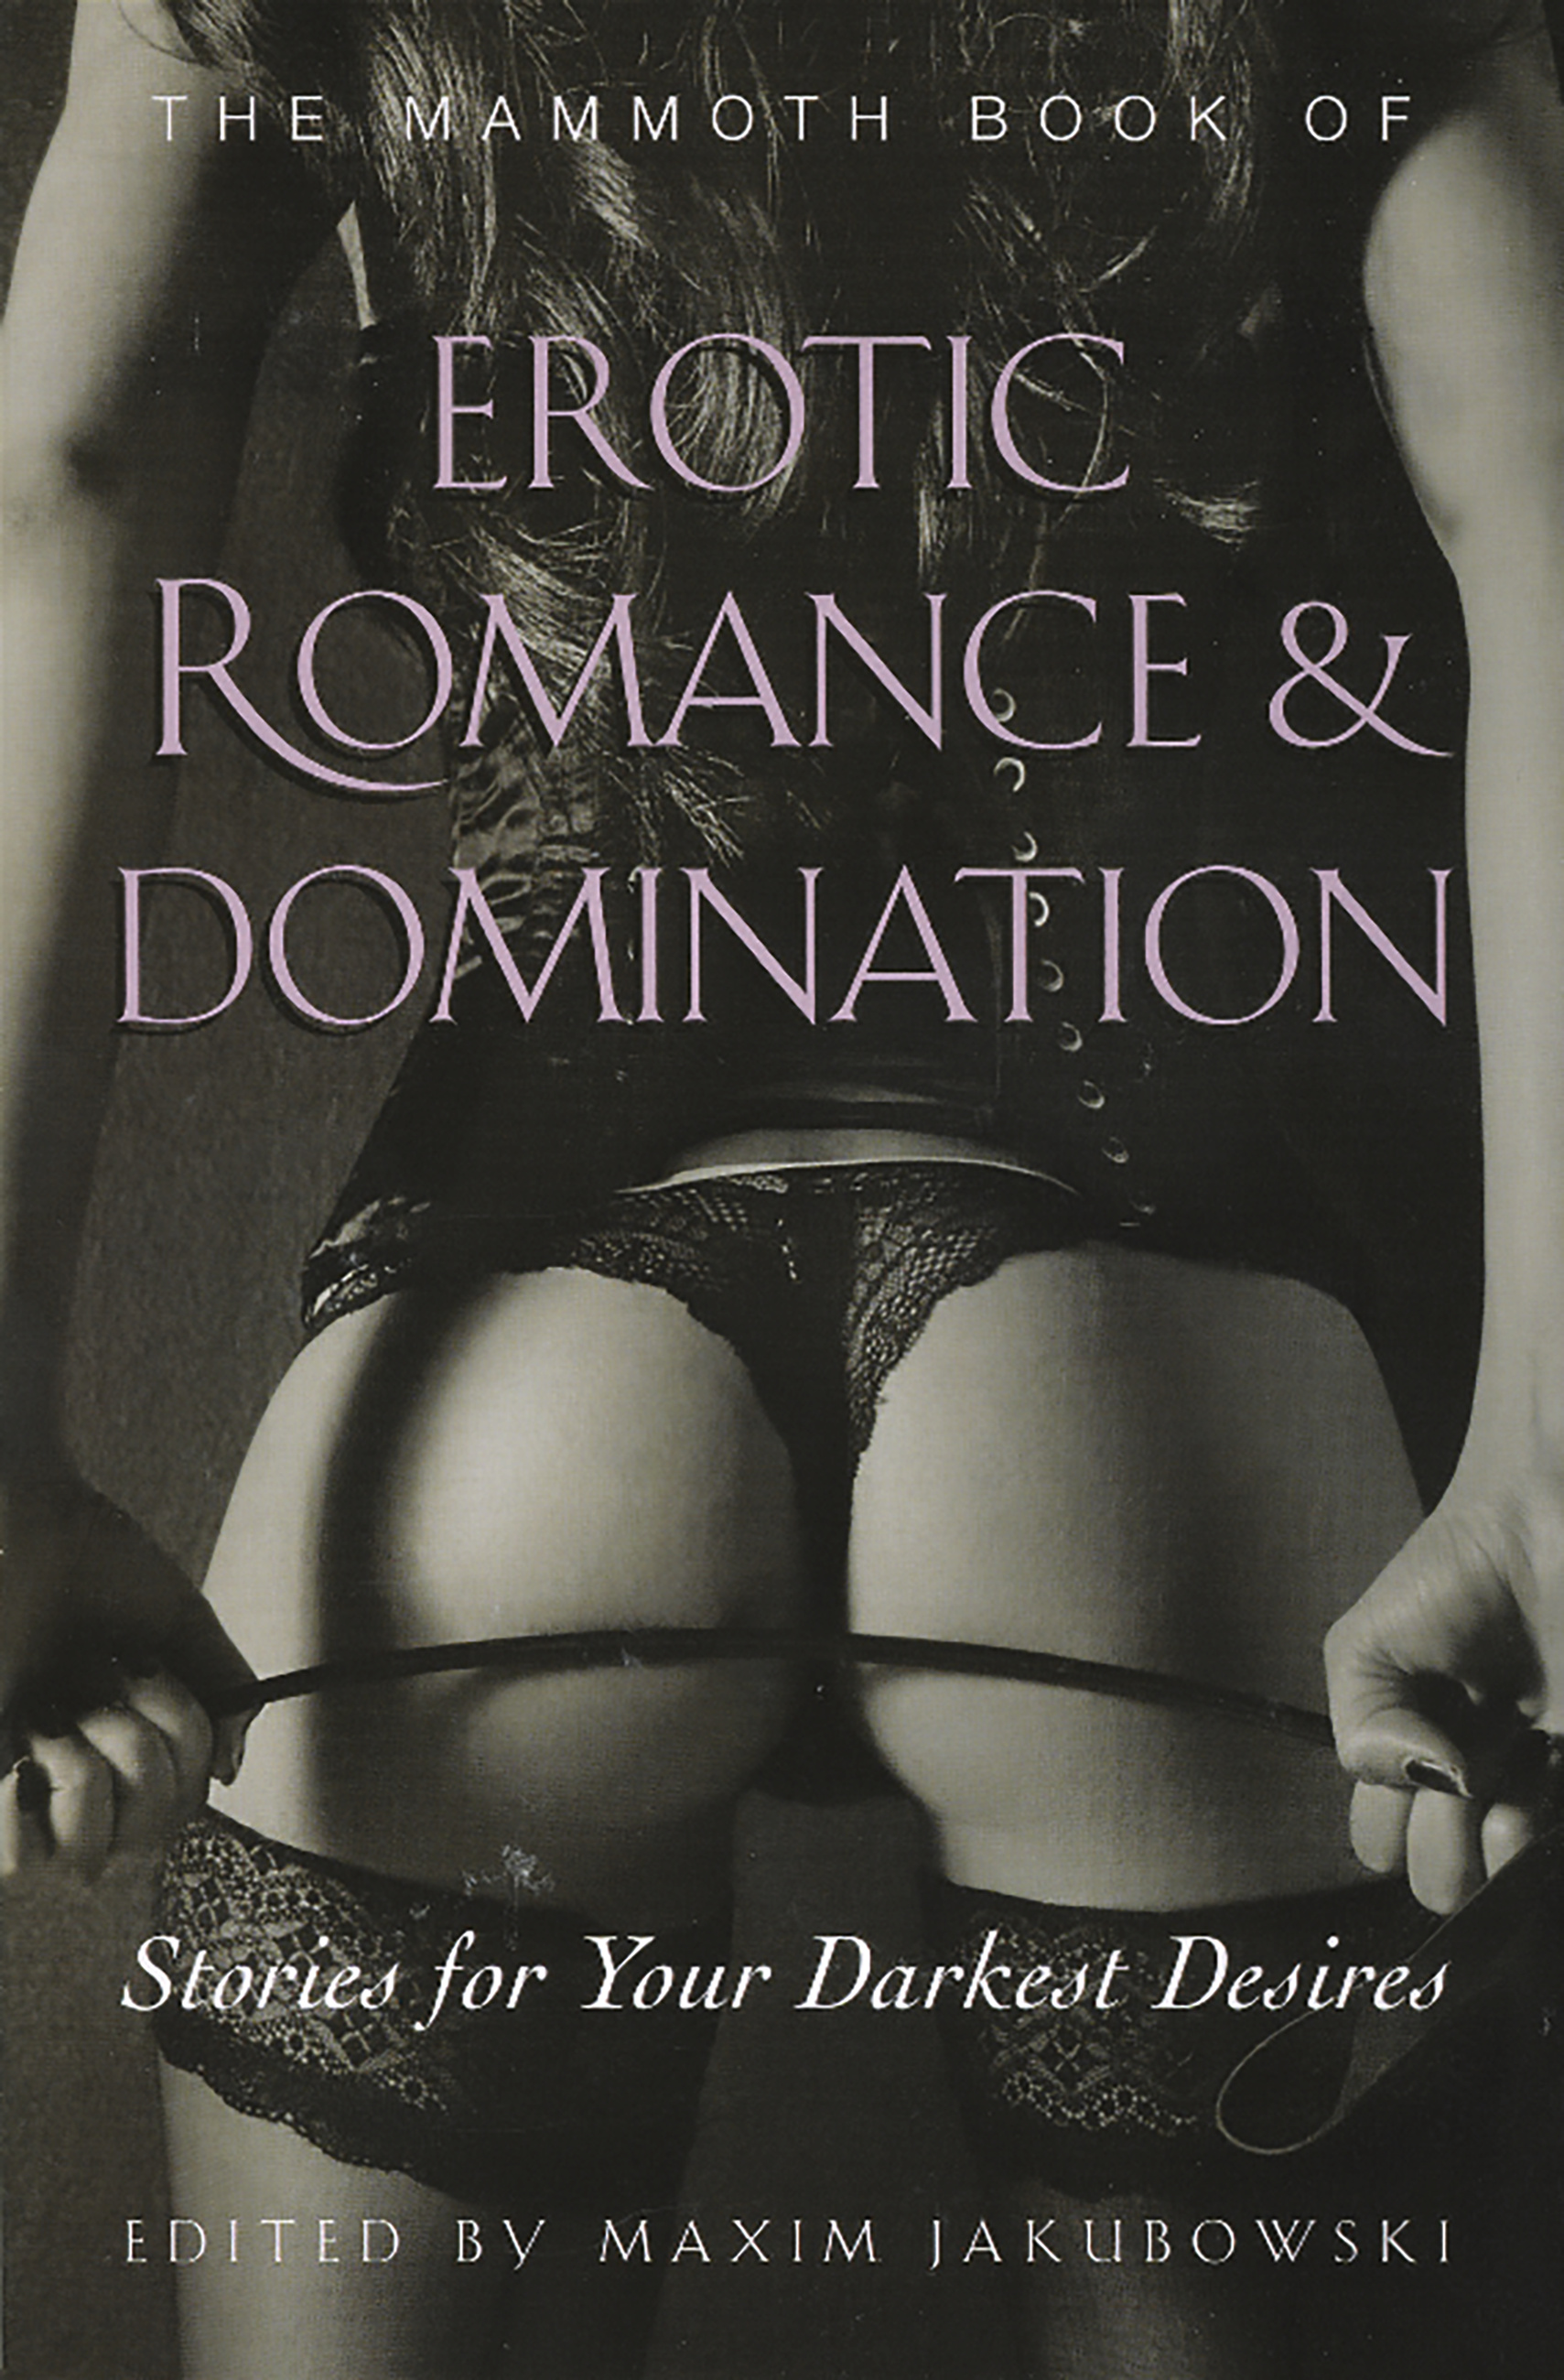 The Mammoth Book of Erotic Romance and Domination by Maxim Jakubowski Hachette Book Group